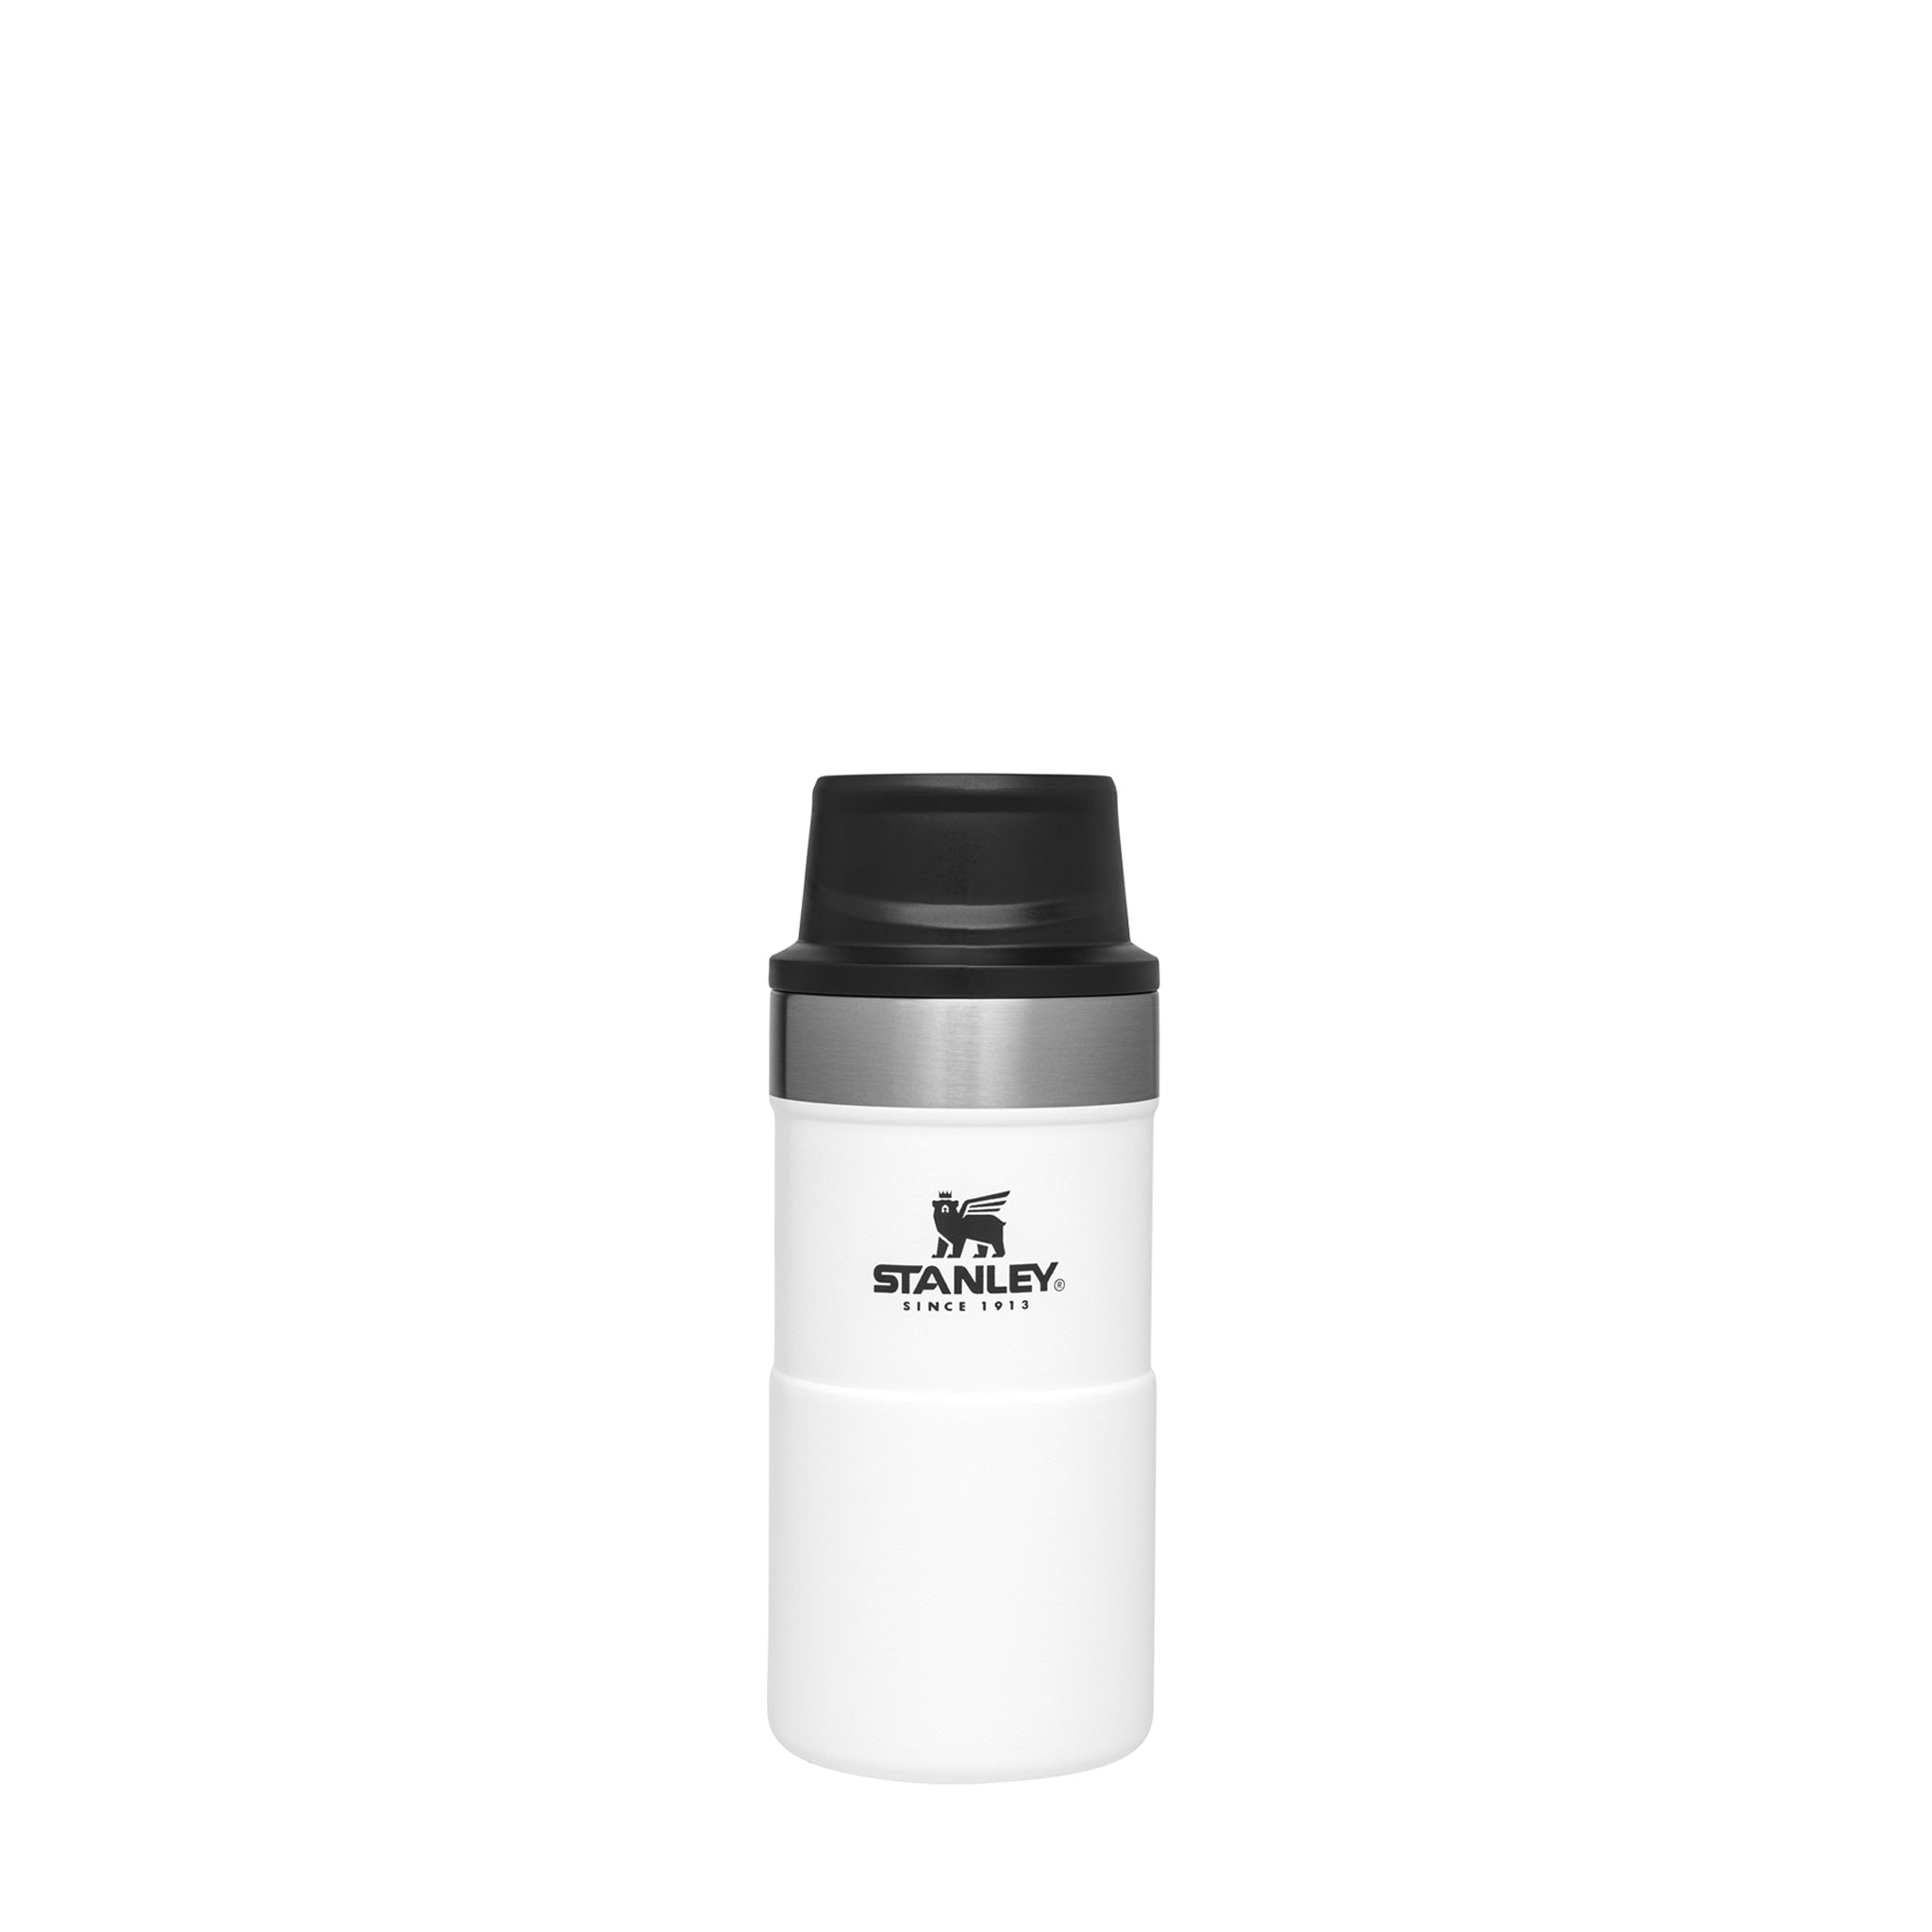 Classic Trigger Action Travel Mug, Insulated Coffee Tumbler